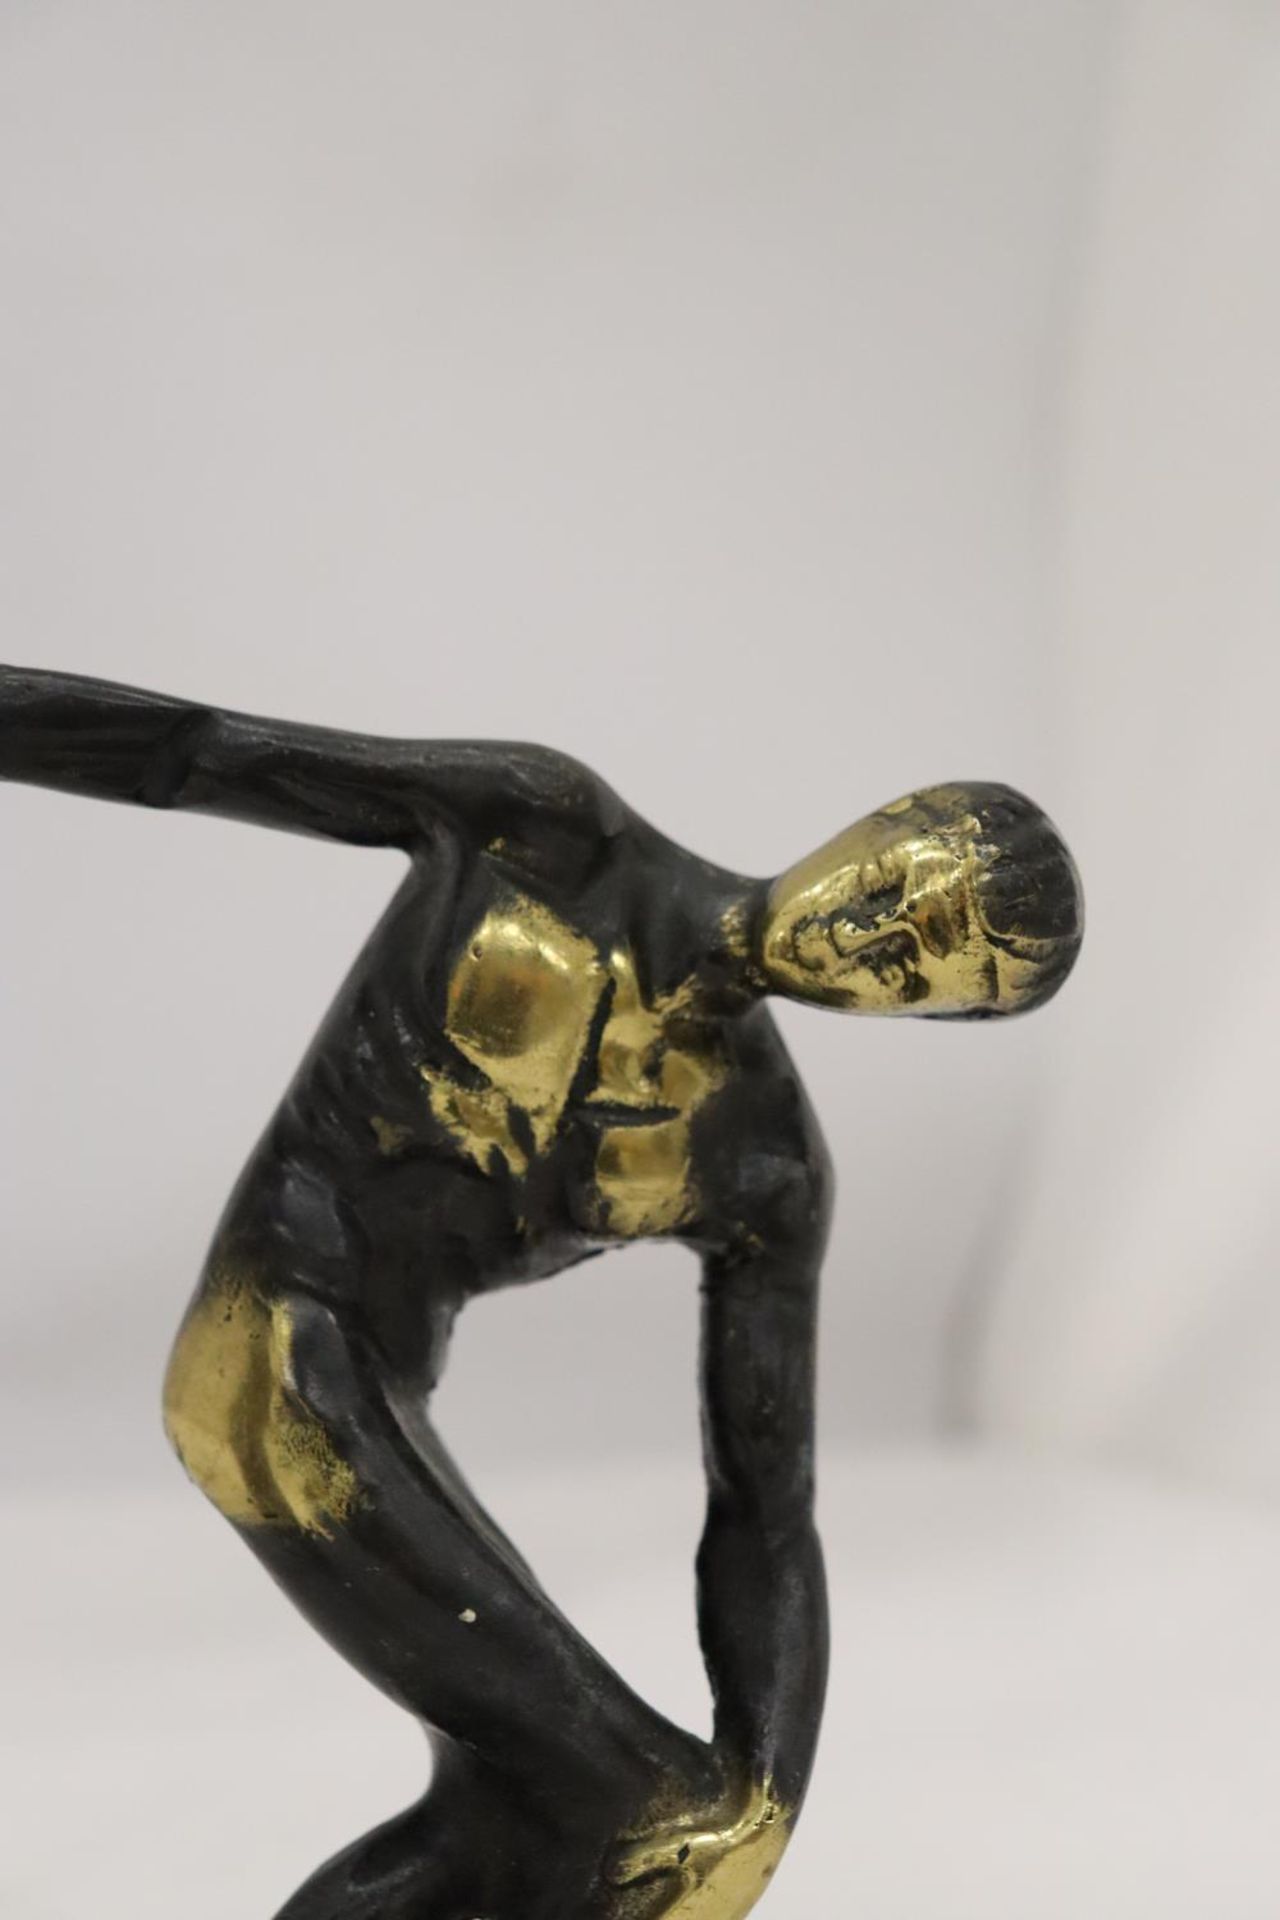 A HEAVY BRASS AND A WHITE METAL DISCUS THROWER - Image 2 of 5